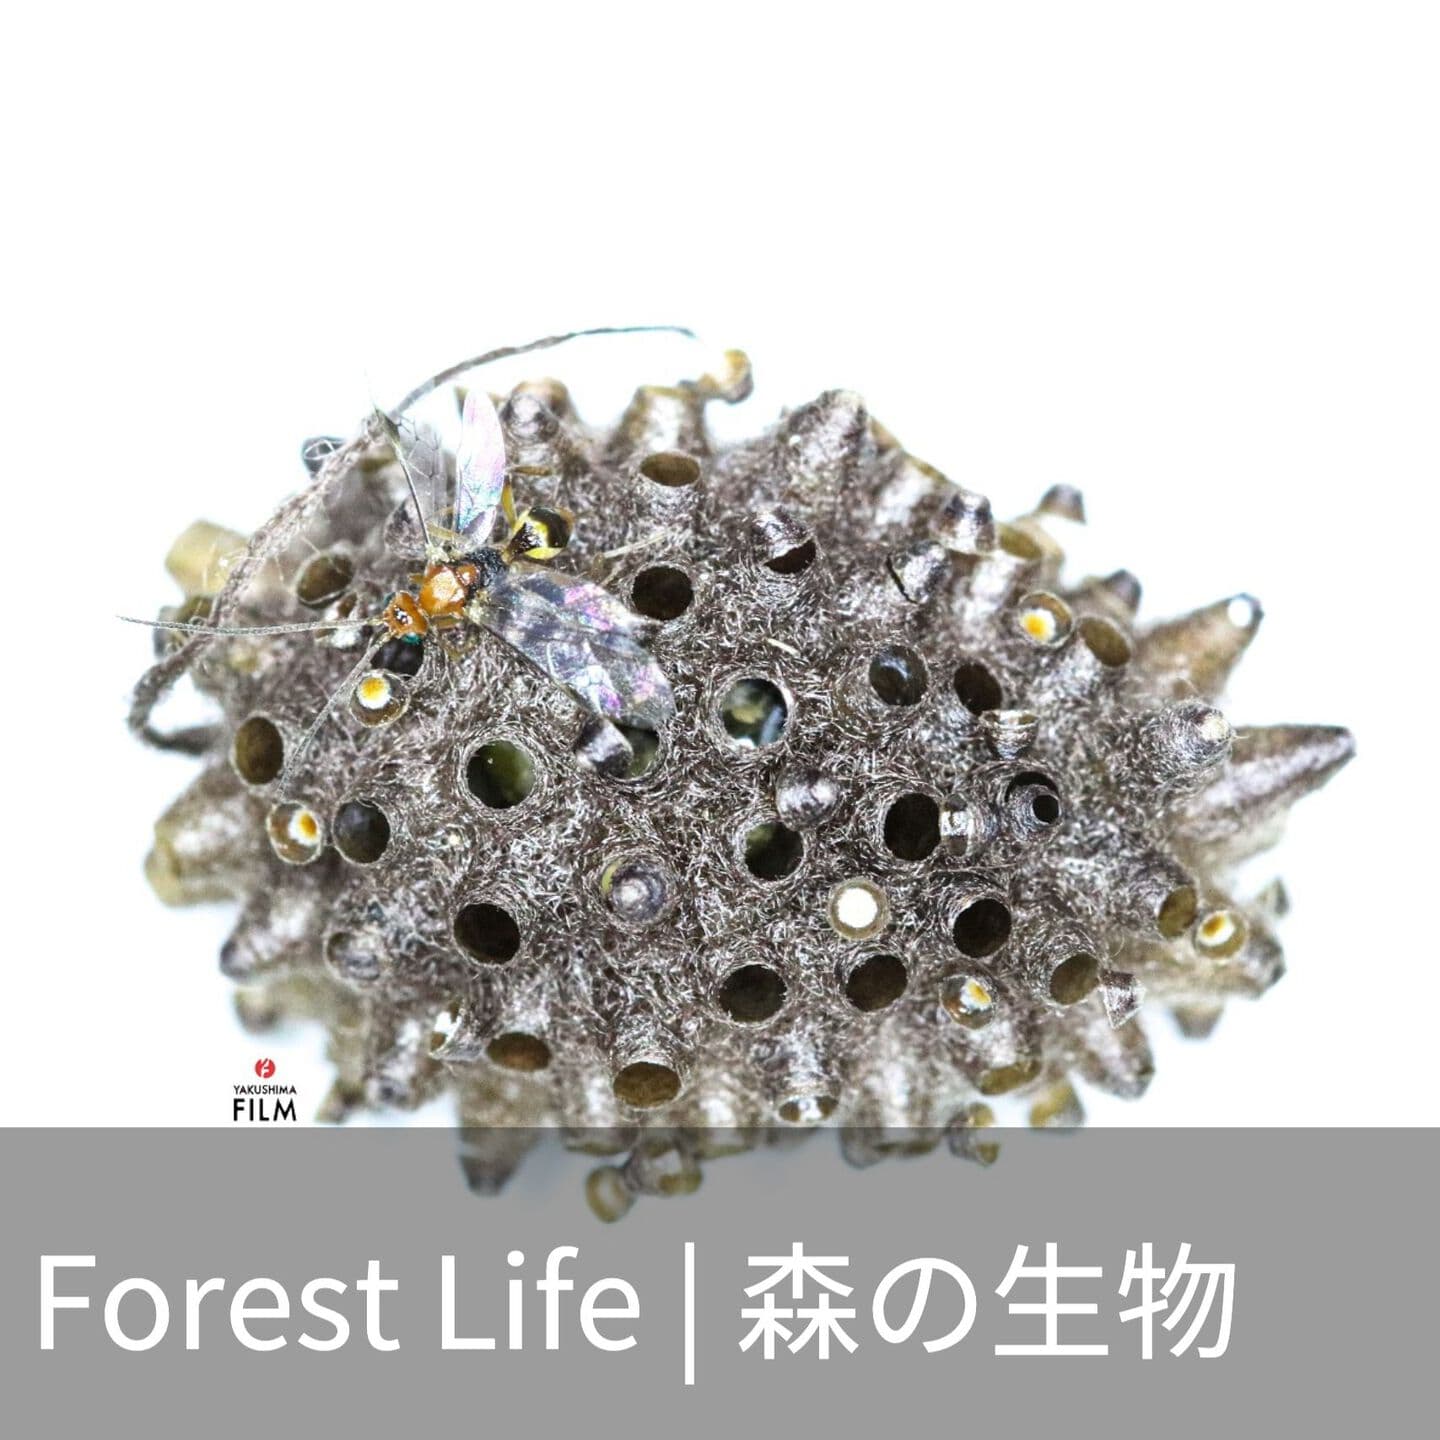 Forest life 森の生物